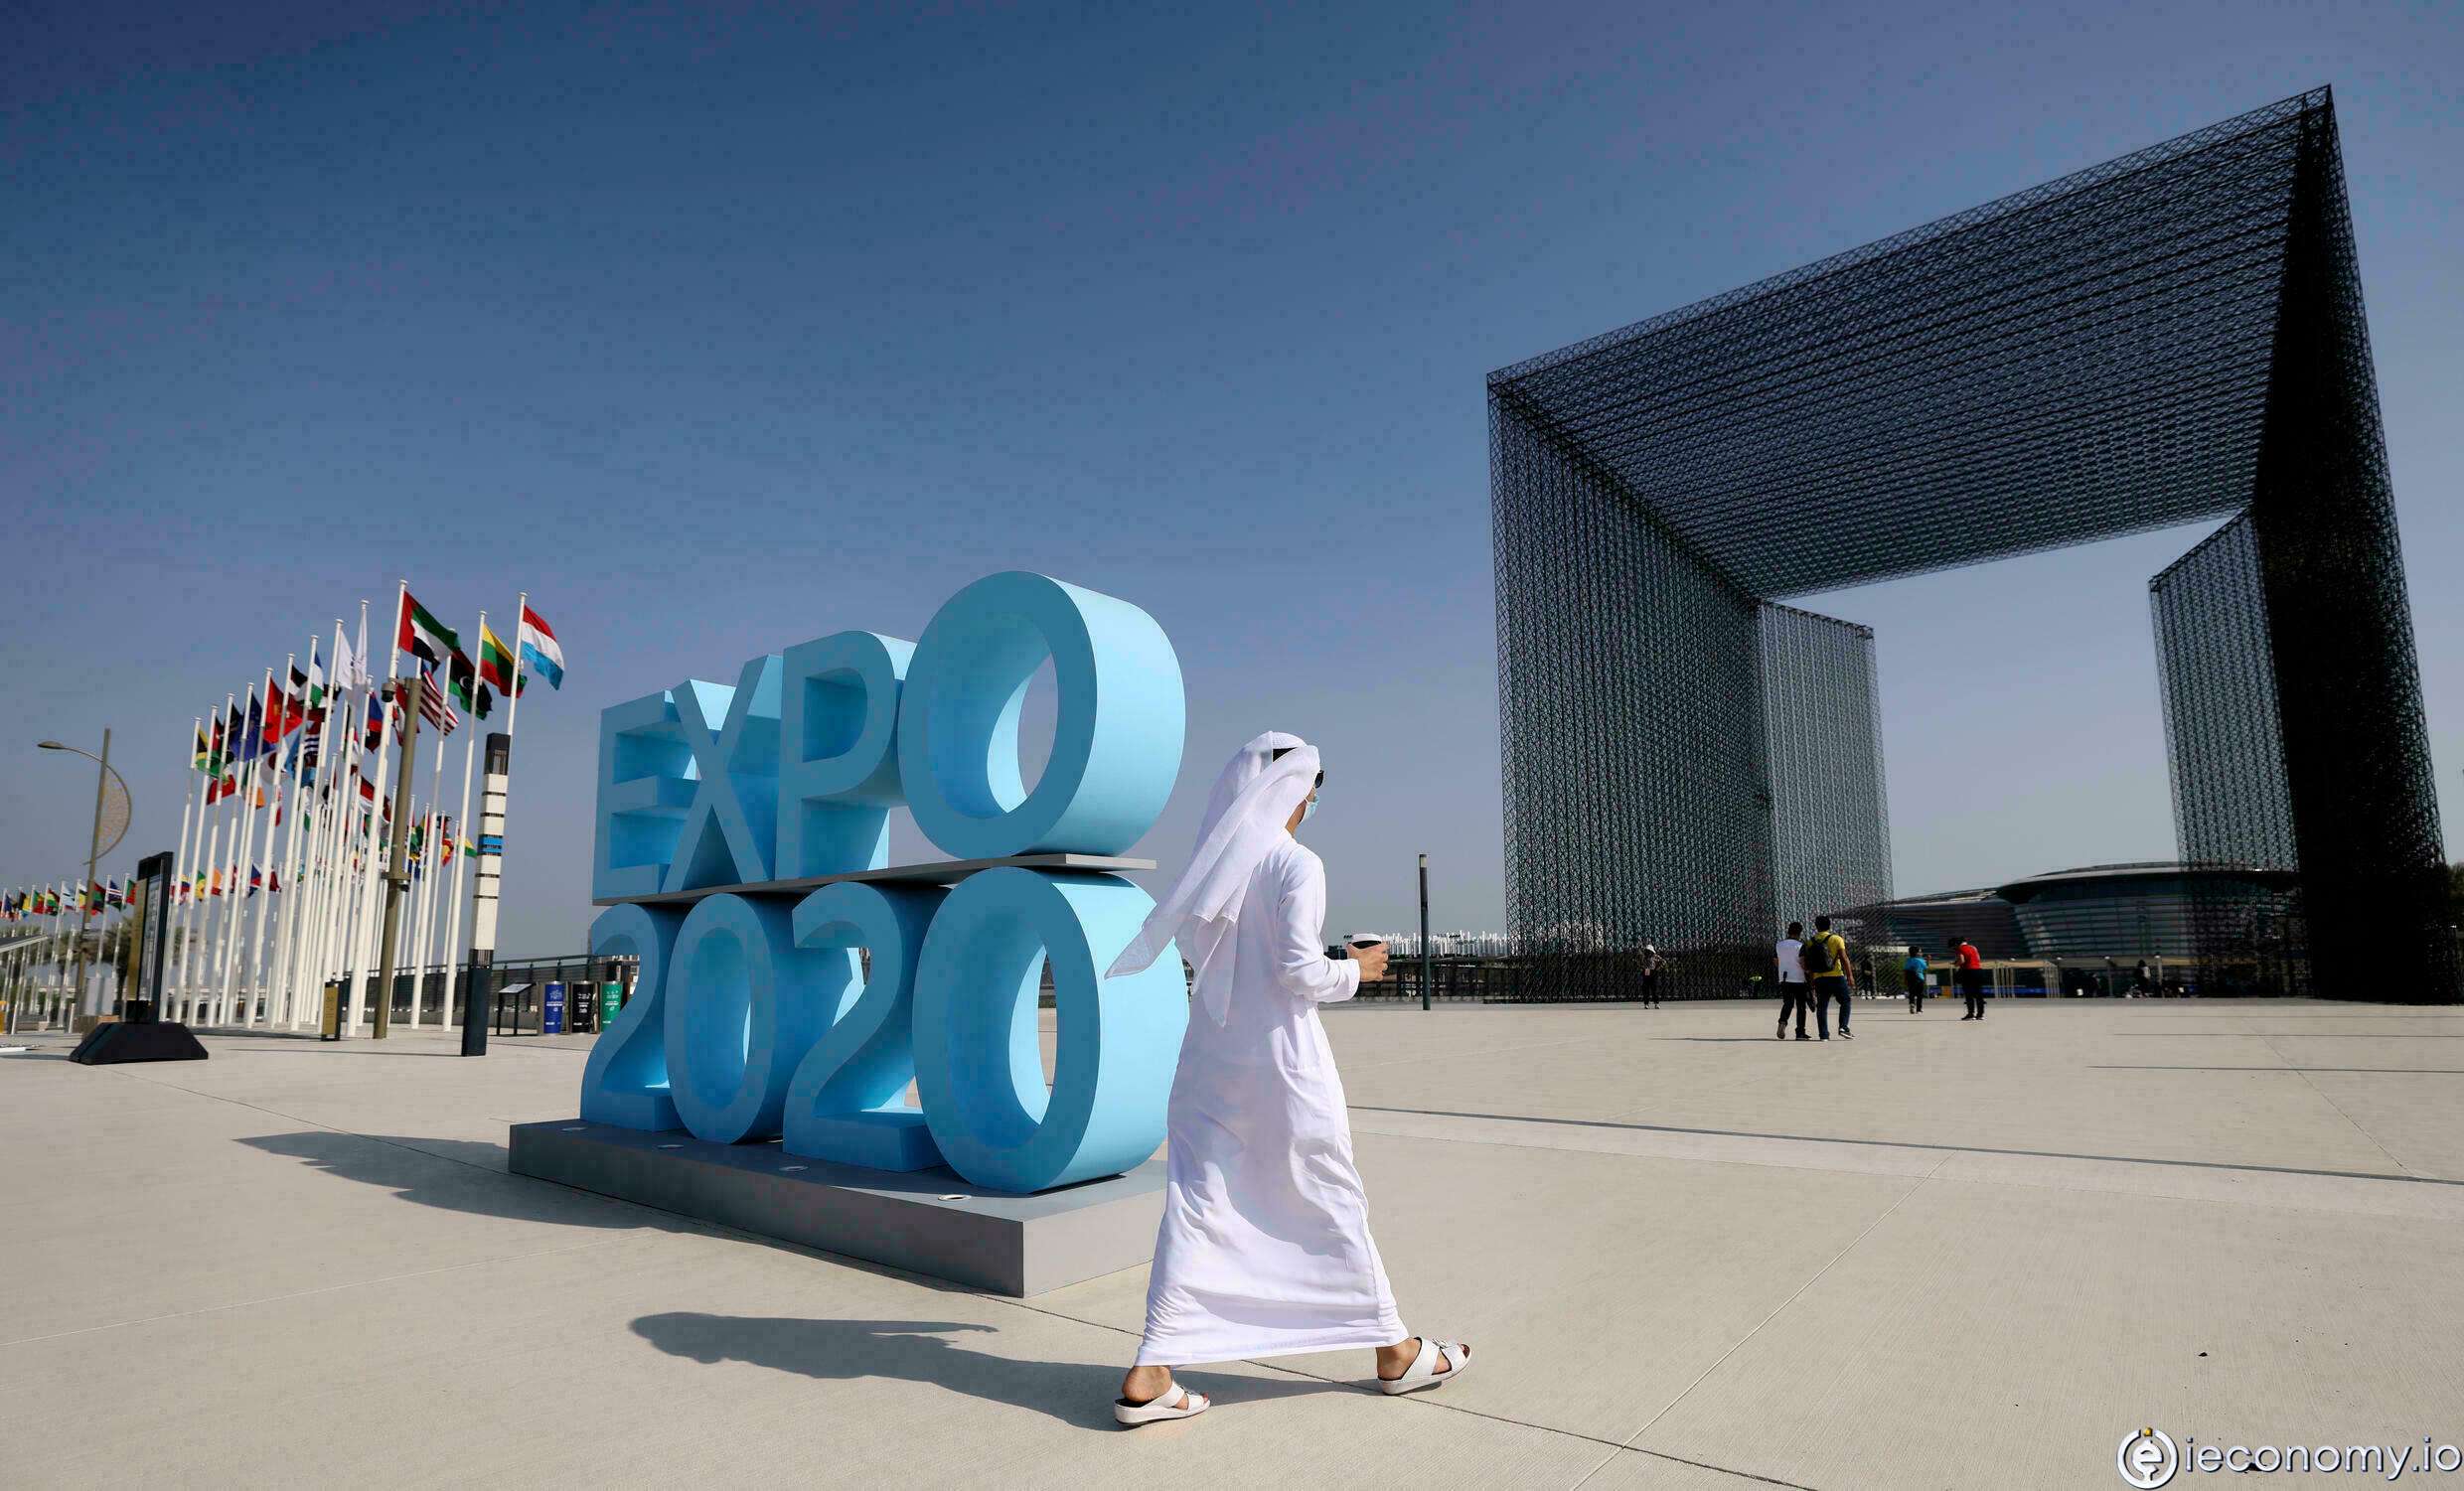 The World Expo 2020 officially opened in Dubai